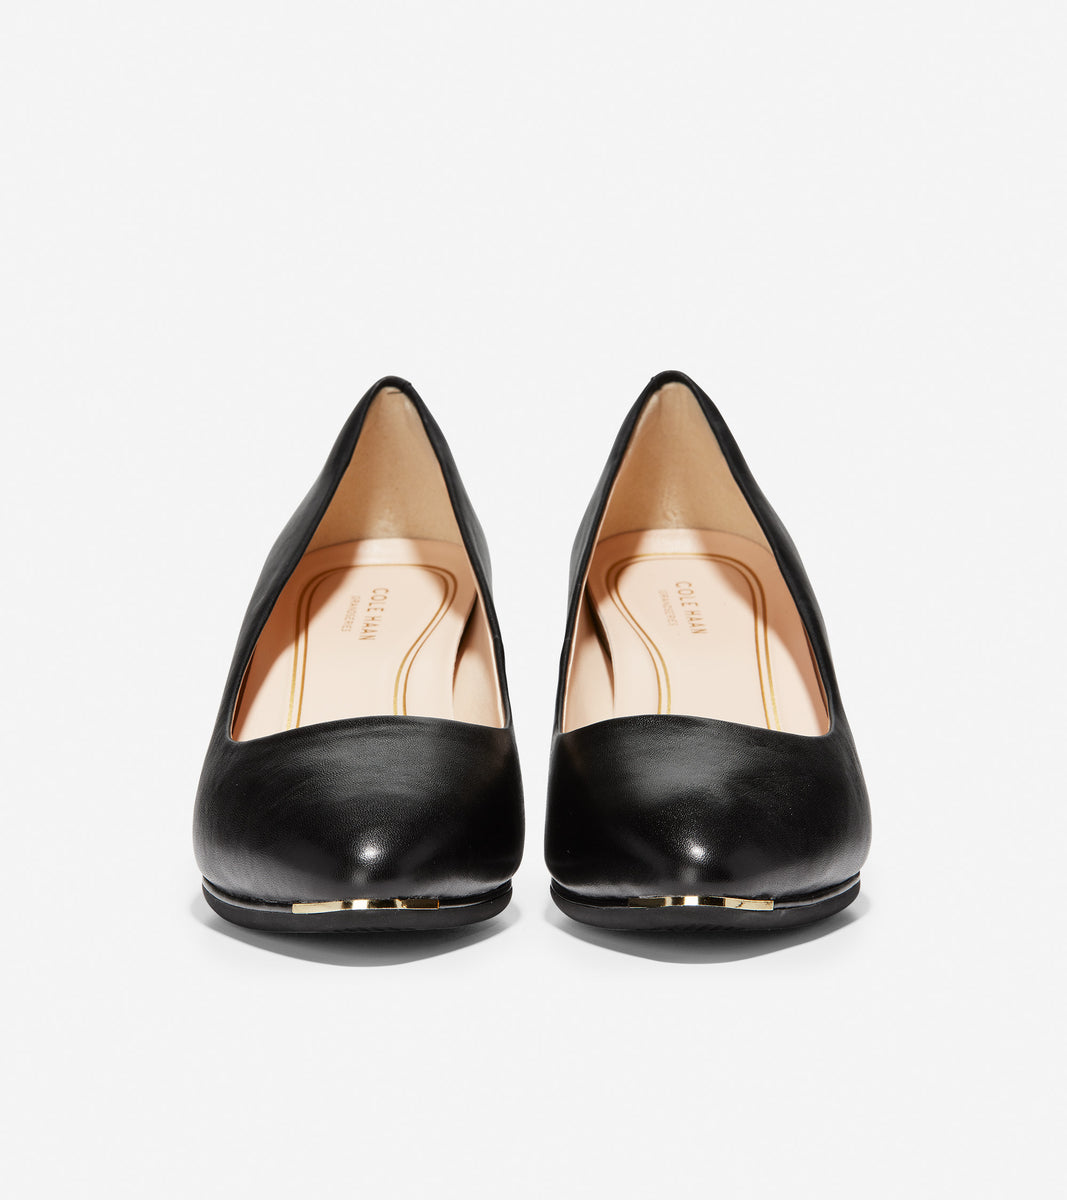 ColeHaan-Grand Ambition Wedge-w15850-Black Leather